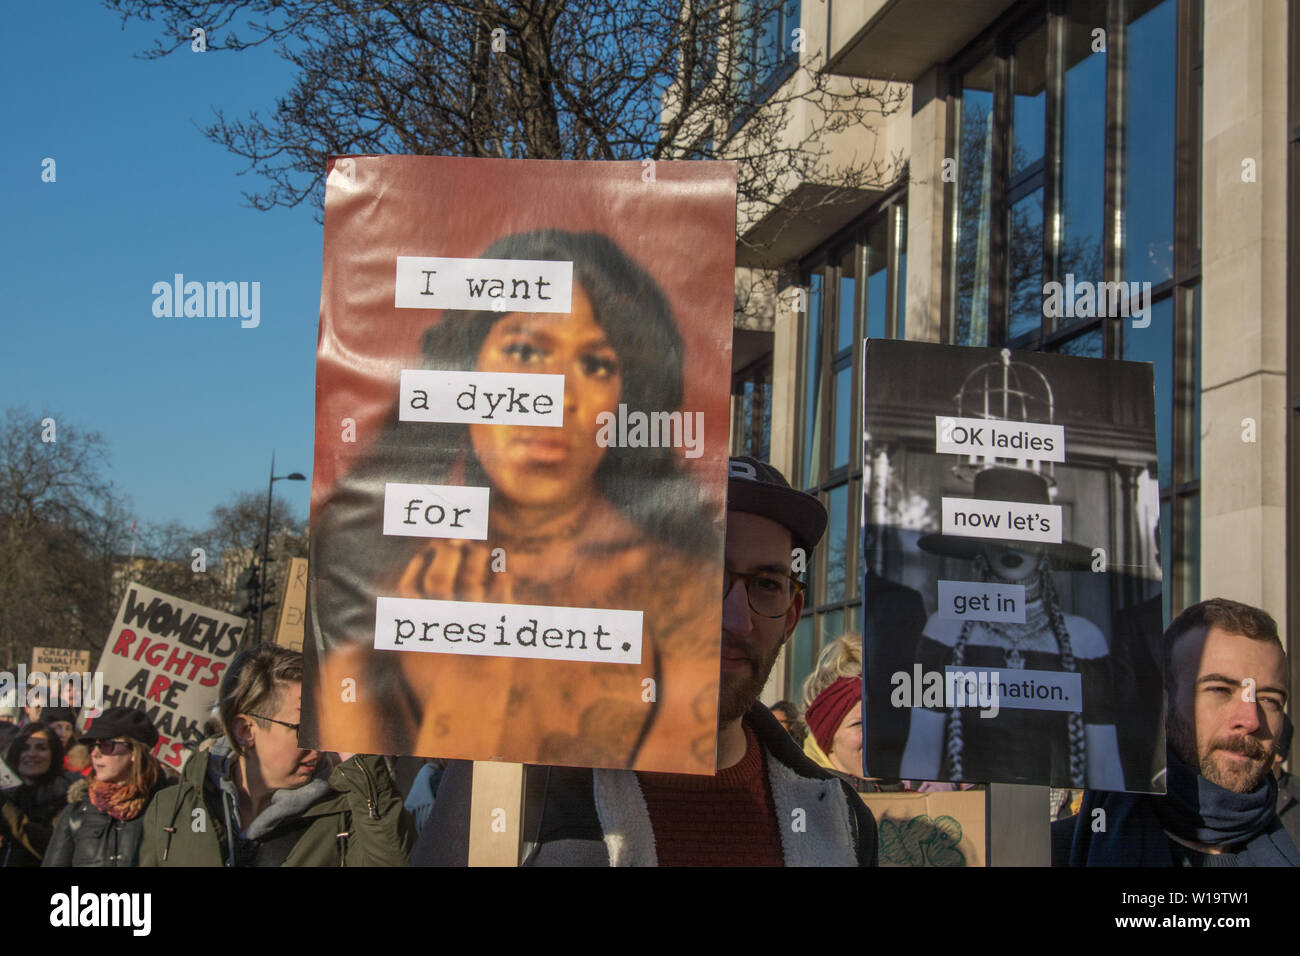 Women's March, London, UK, 21st January 2017. Protestors carry placards bearing a quote from a poem by New York artist Zoe Leonard 'I want ' during the Women's march in London the day after the inauguration of President Donald Trump. The quote is superimposed over an image of Mykki Blanco, a rapper who has performed the poem. The line in full is 'I want a Dyke for President'. Up to 10,000 took part in London as women worldwide marked the day by marching in an act of international solidarity. Stock Photo